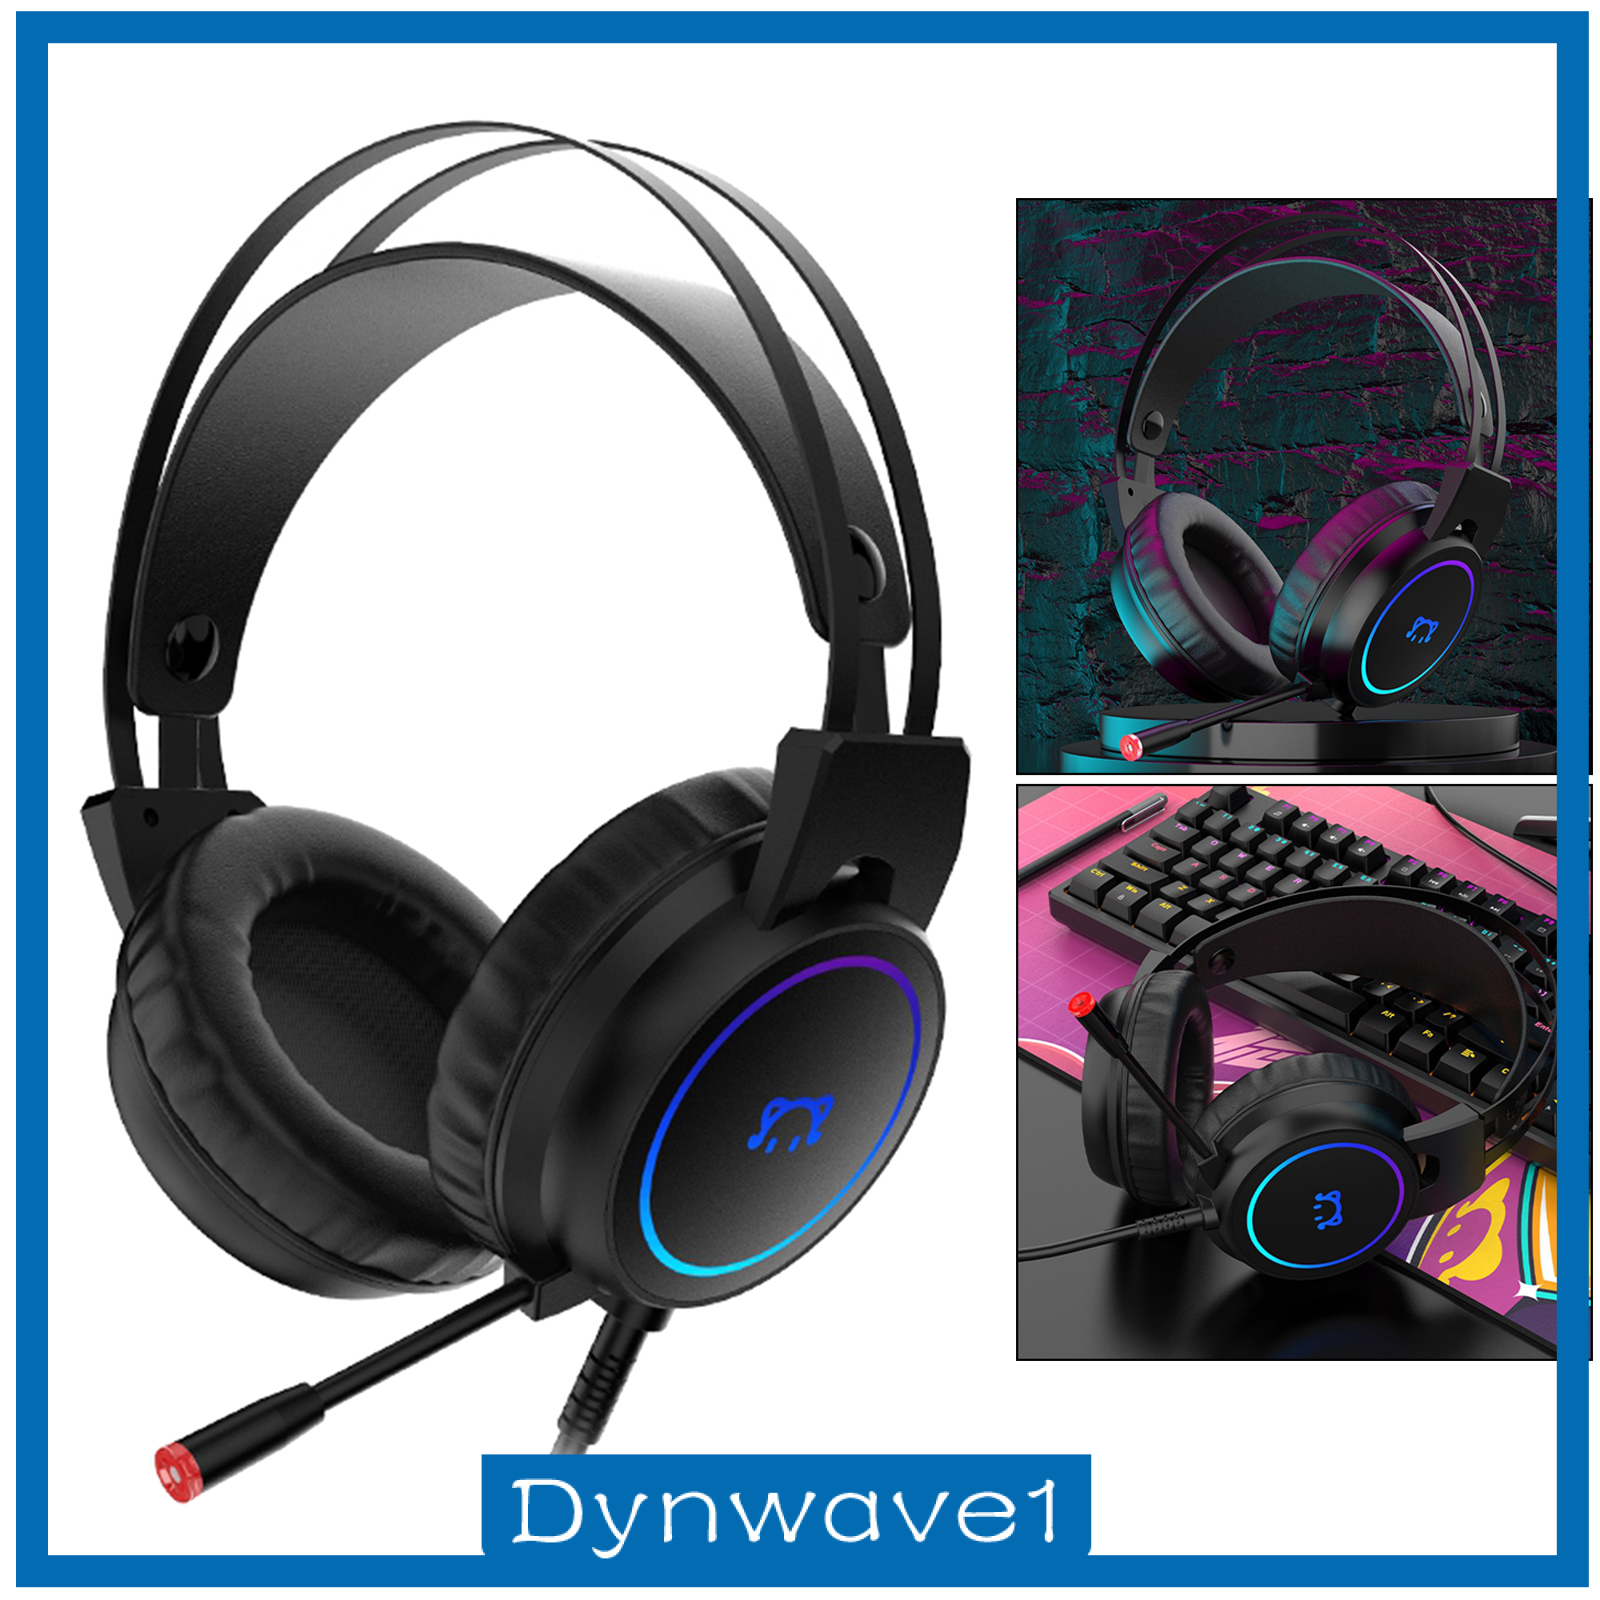 [DYNWAVE1]Gaming Headset Surround Sound Gaming Headphones with Noise Canceling Microphone, USB Over-Ear Headphone Wired with RGB Light, 50mm Driver for Laptop